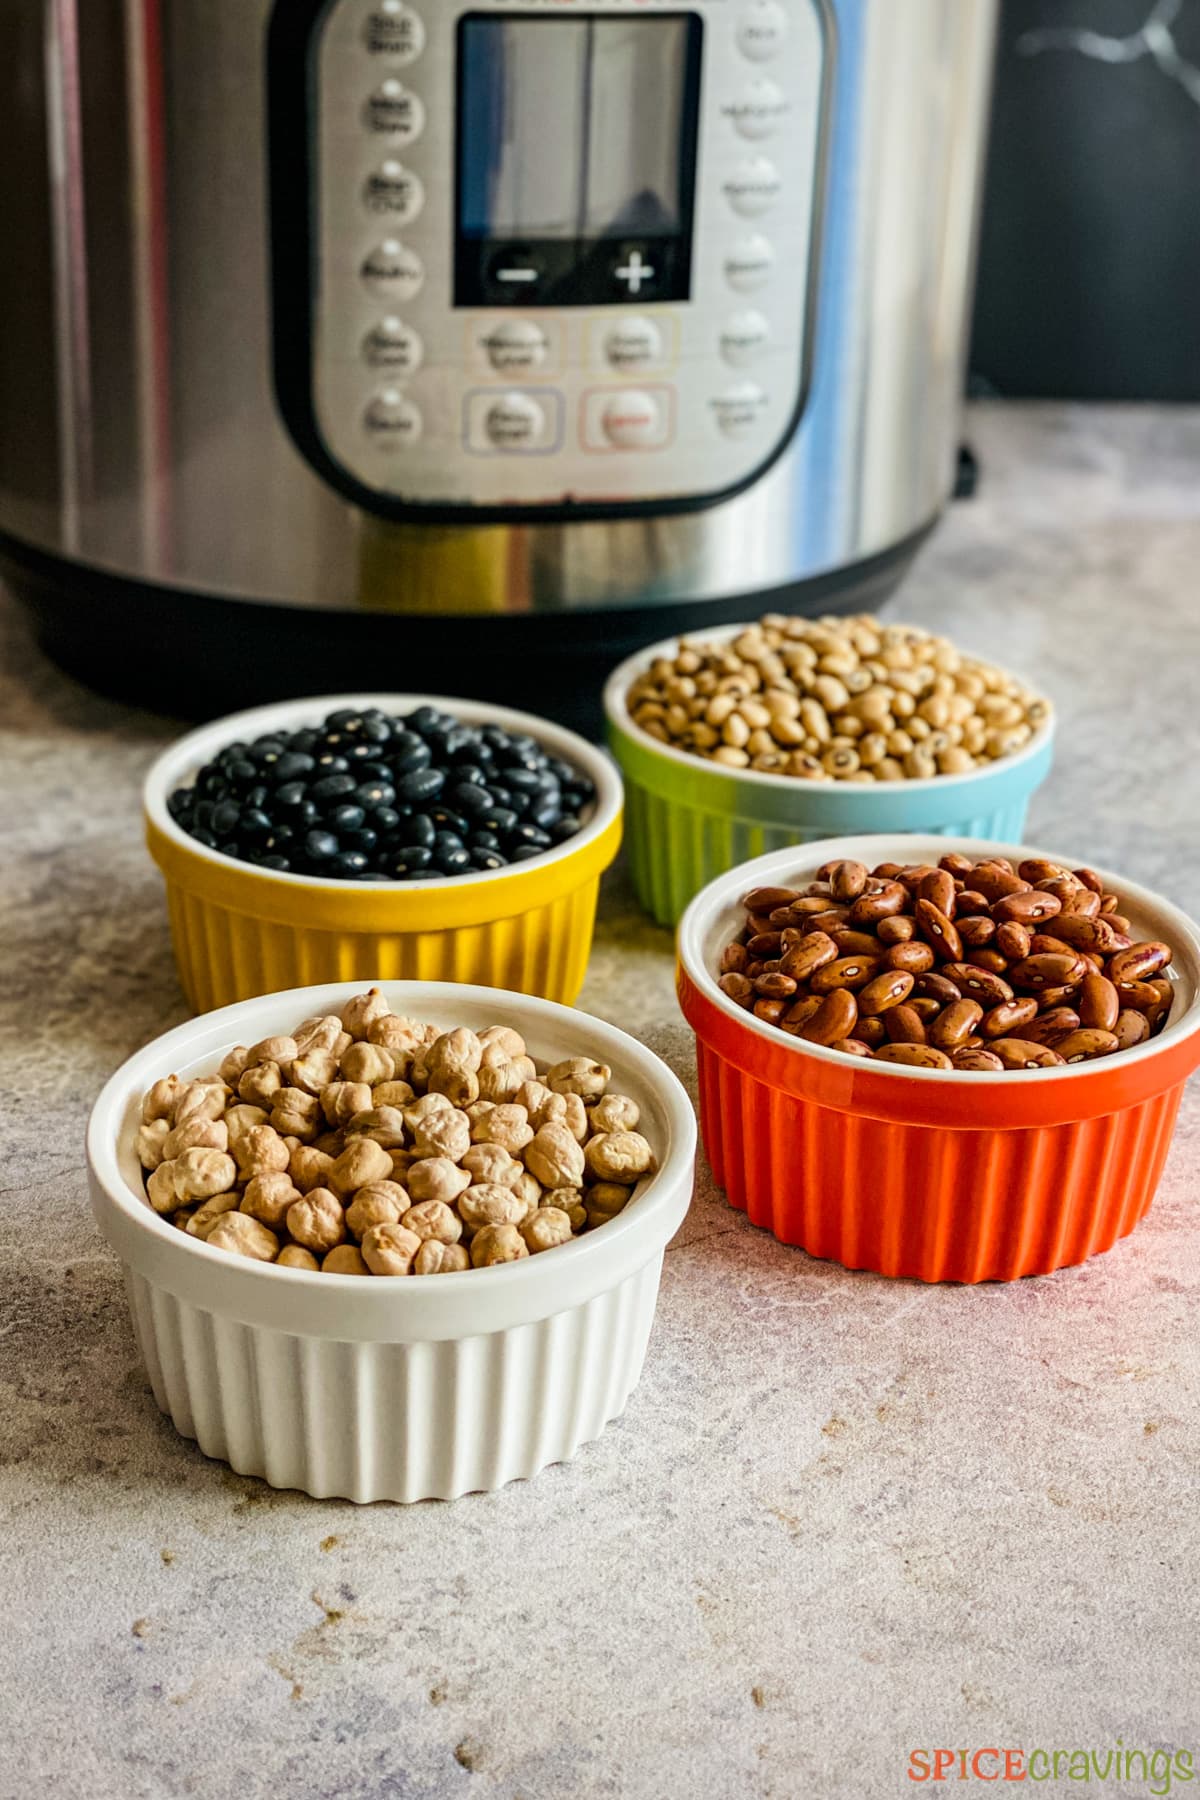 4 bowls of dried beans next to an Instant Pot